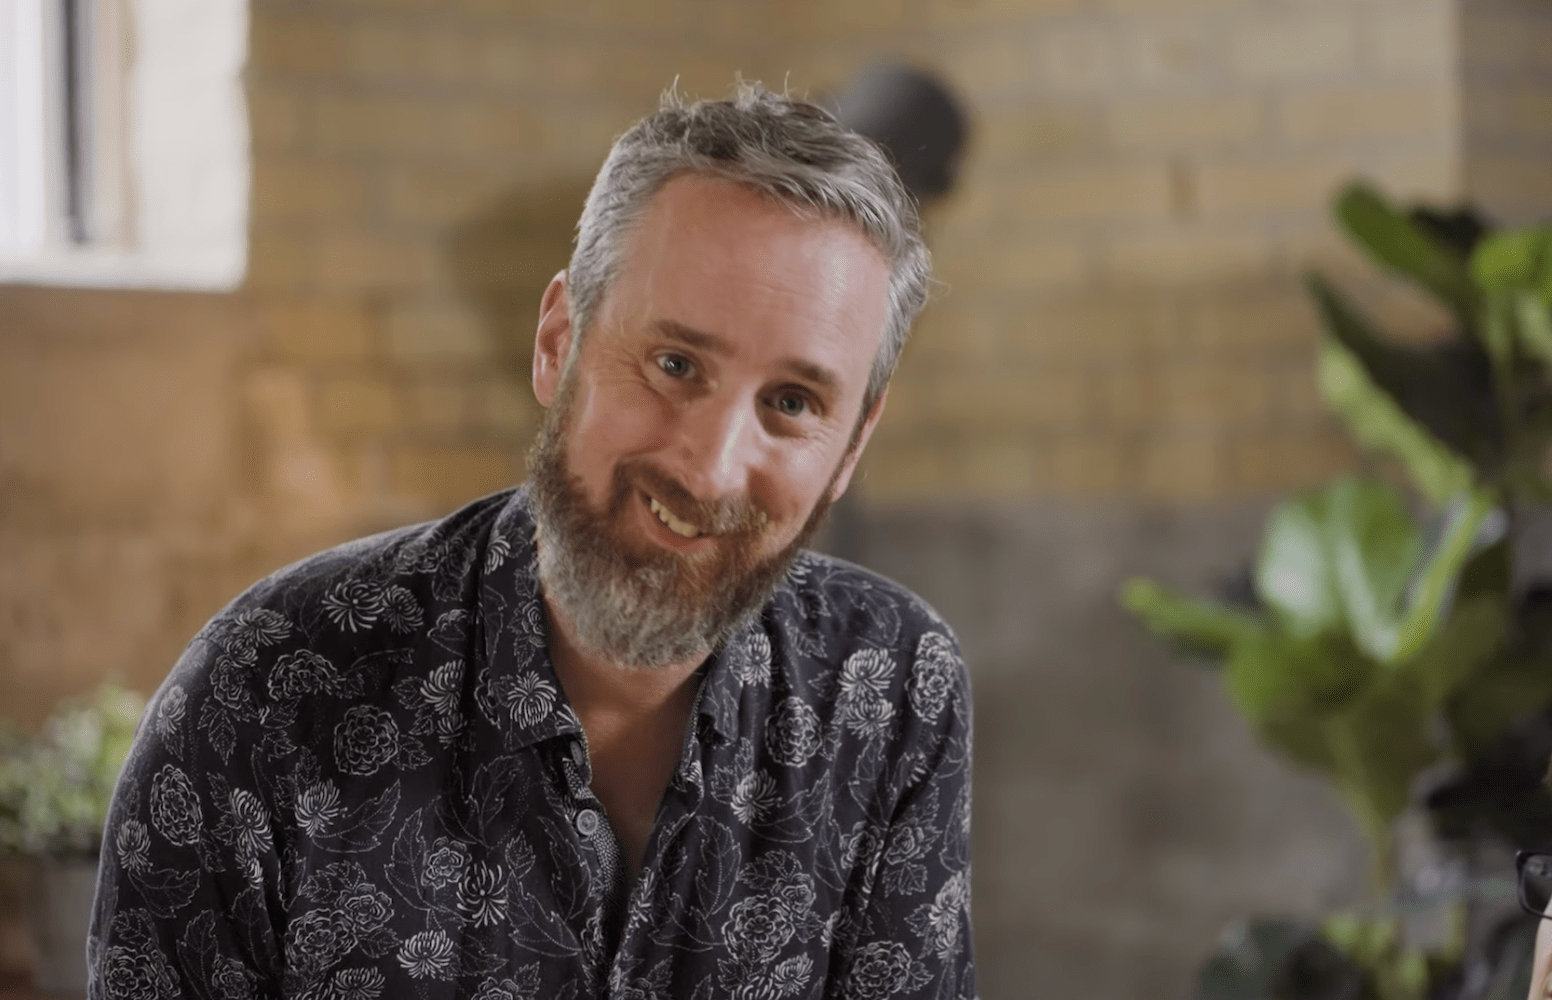 Chip Zdarsky releases final CHIPCLASS focused on writing technique